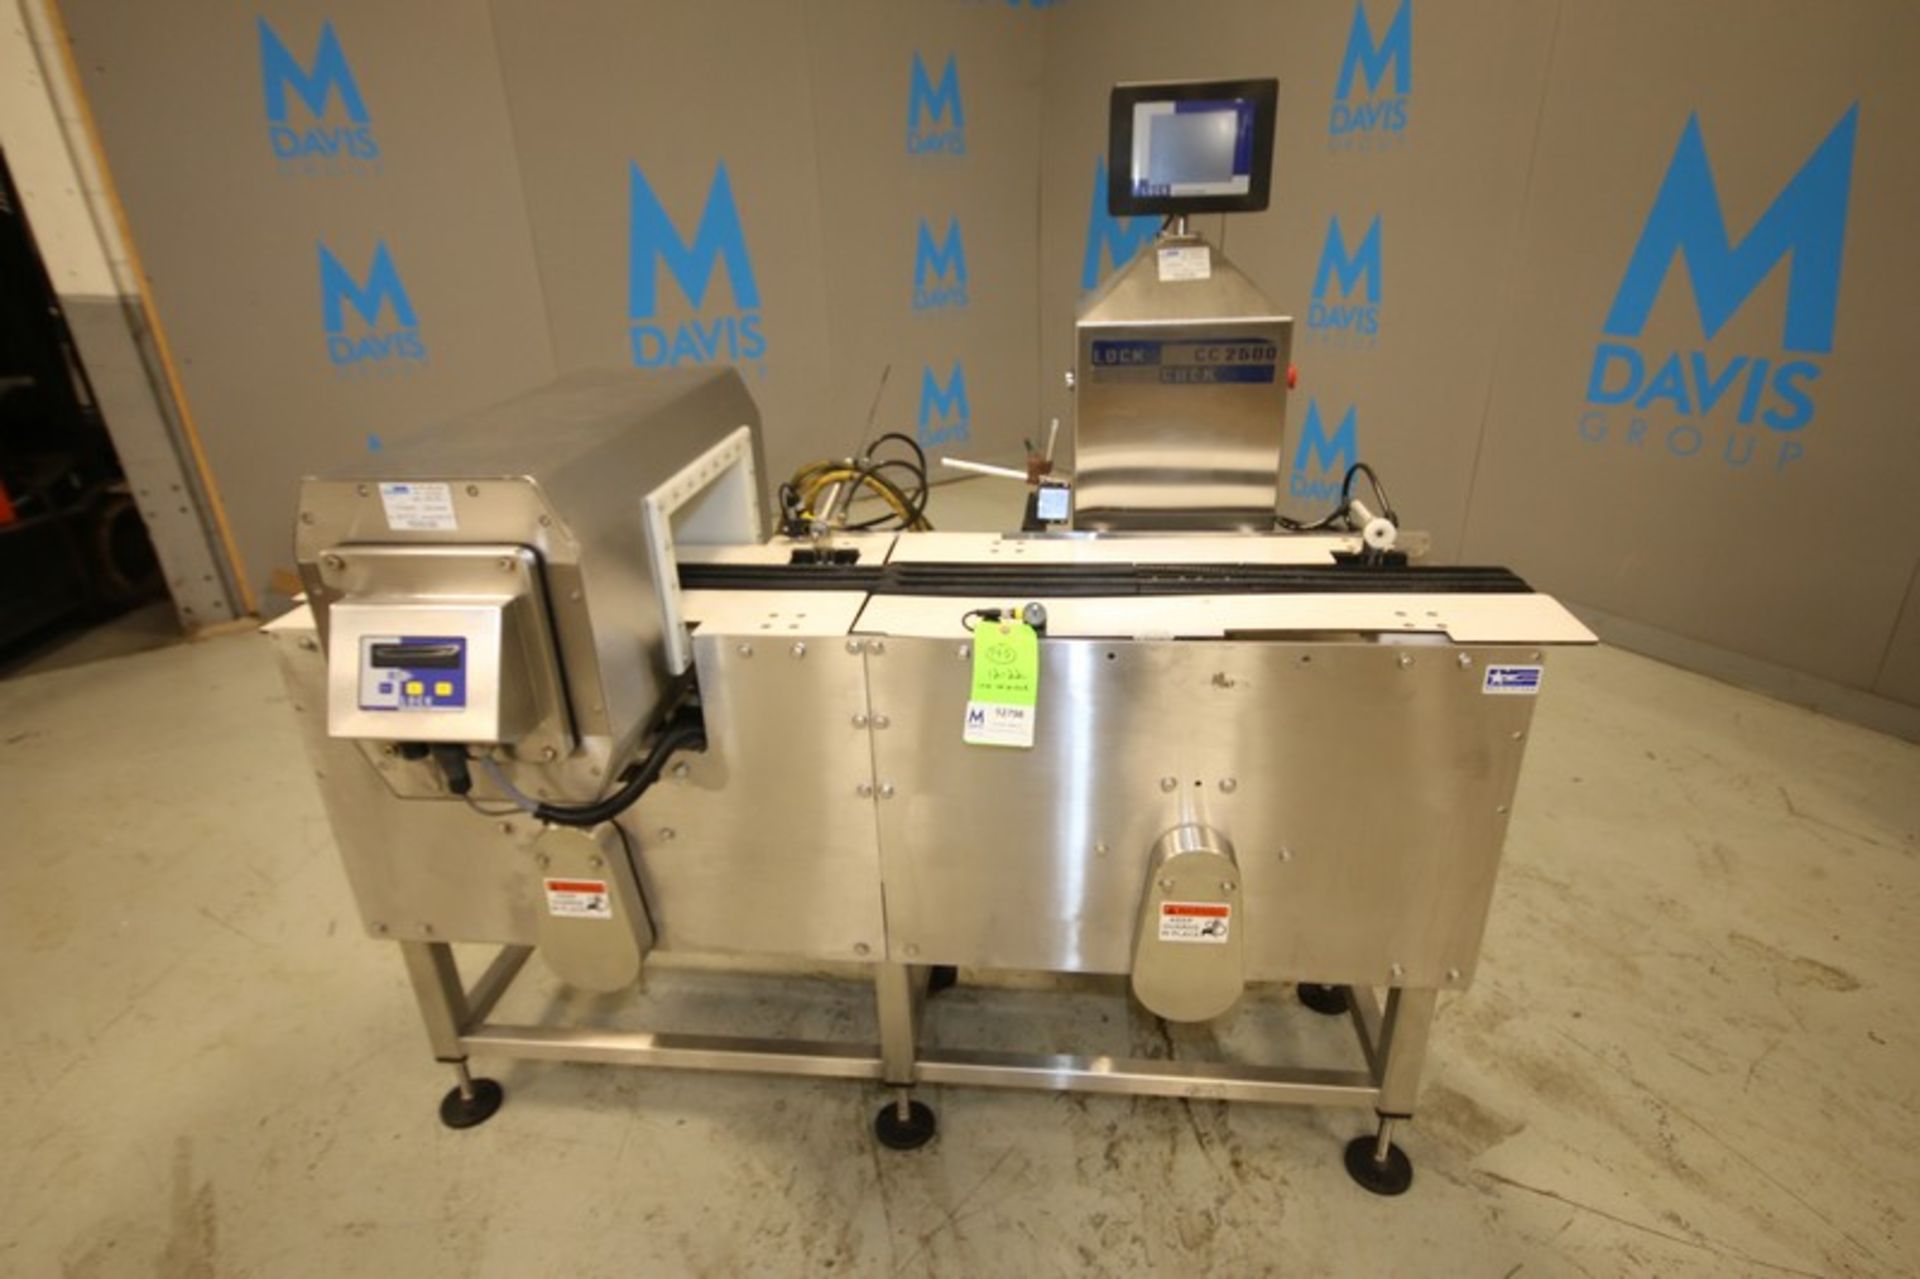 2010 Lock Weighchek S/S Metal Detector / Check-Weigher, Model CC2500 WEIGHCHECK-CHAIN, SN LIS1002-